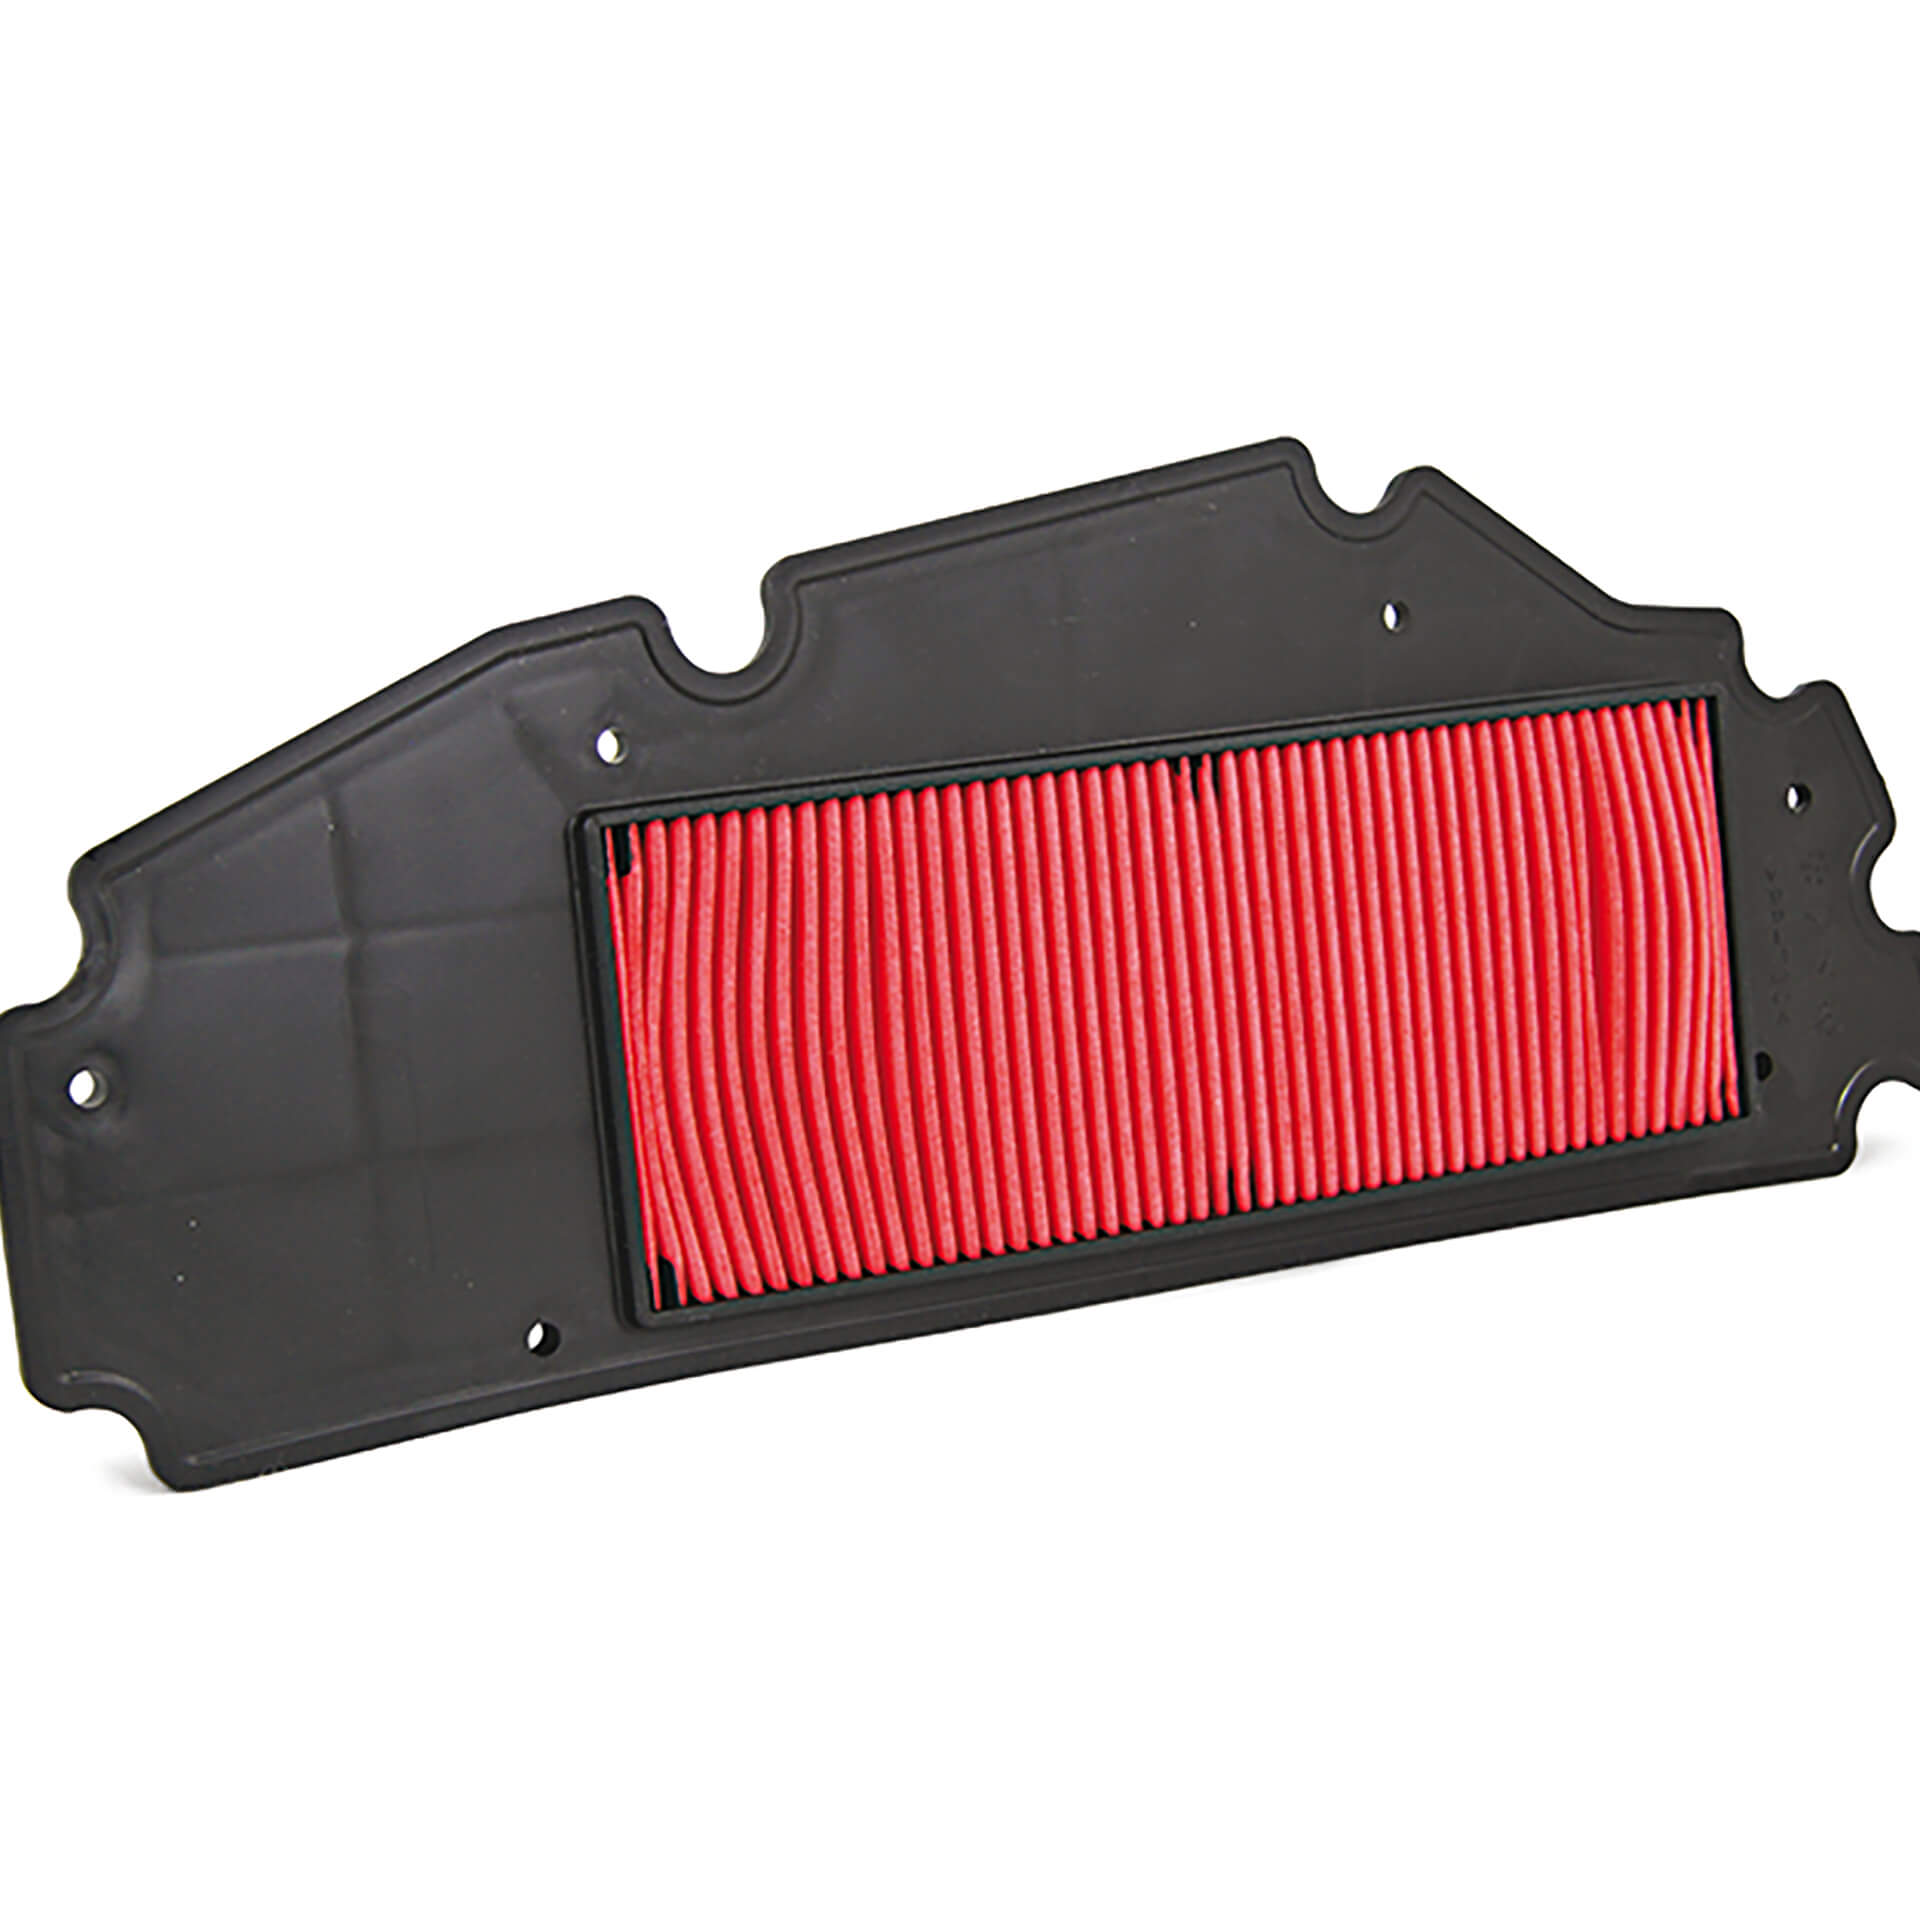 champion Air filter for various models